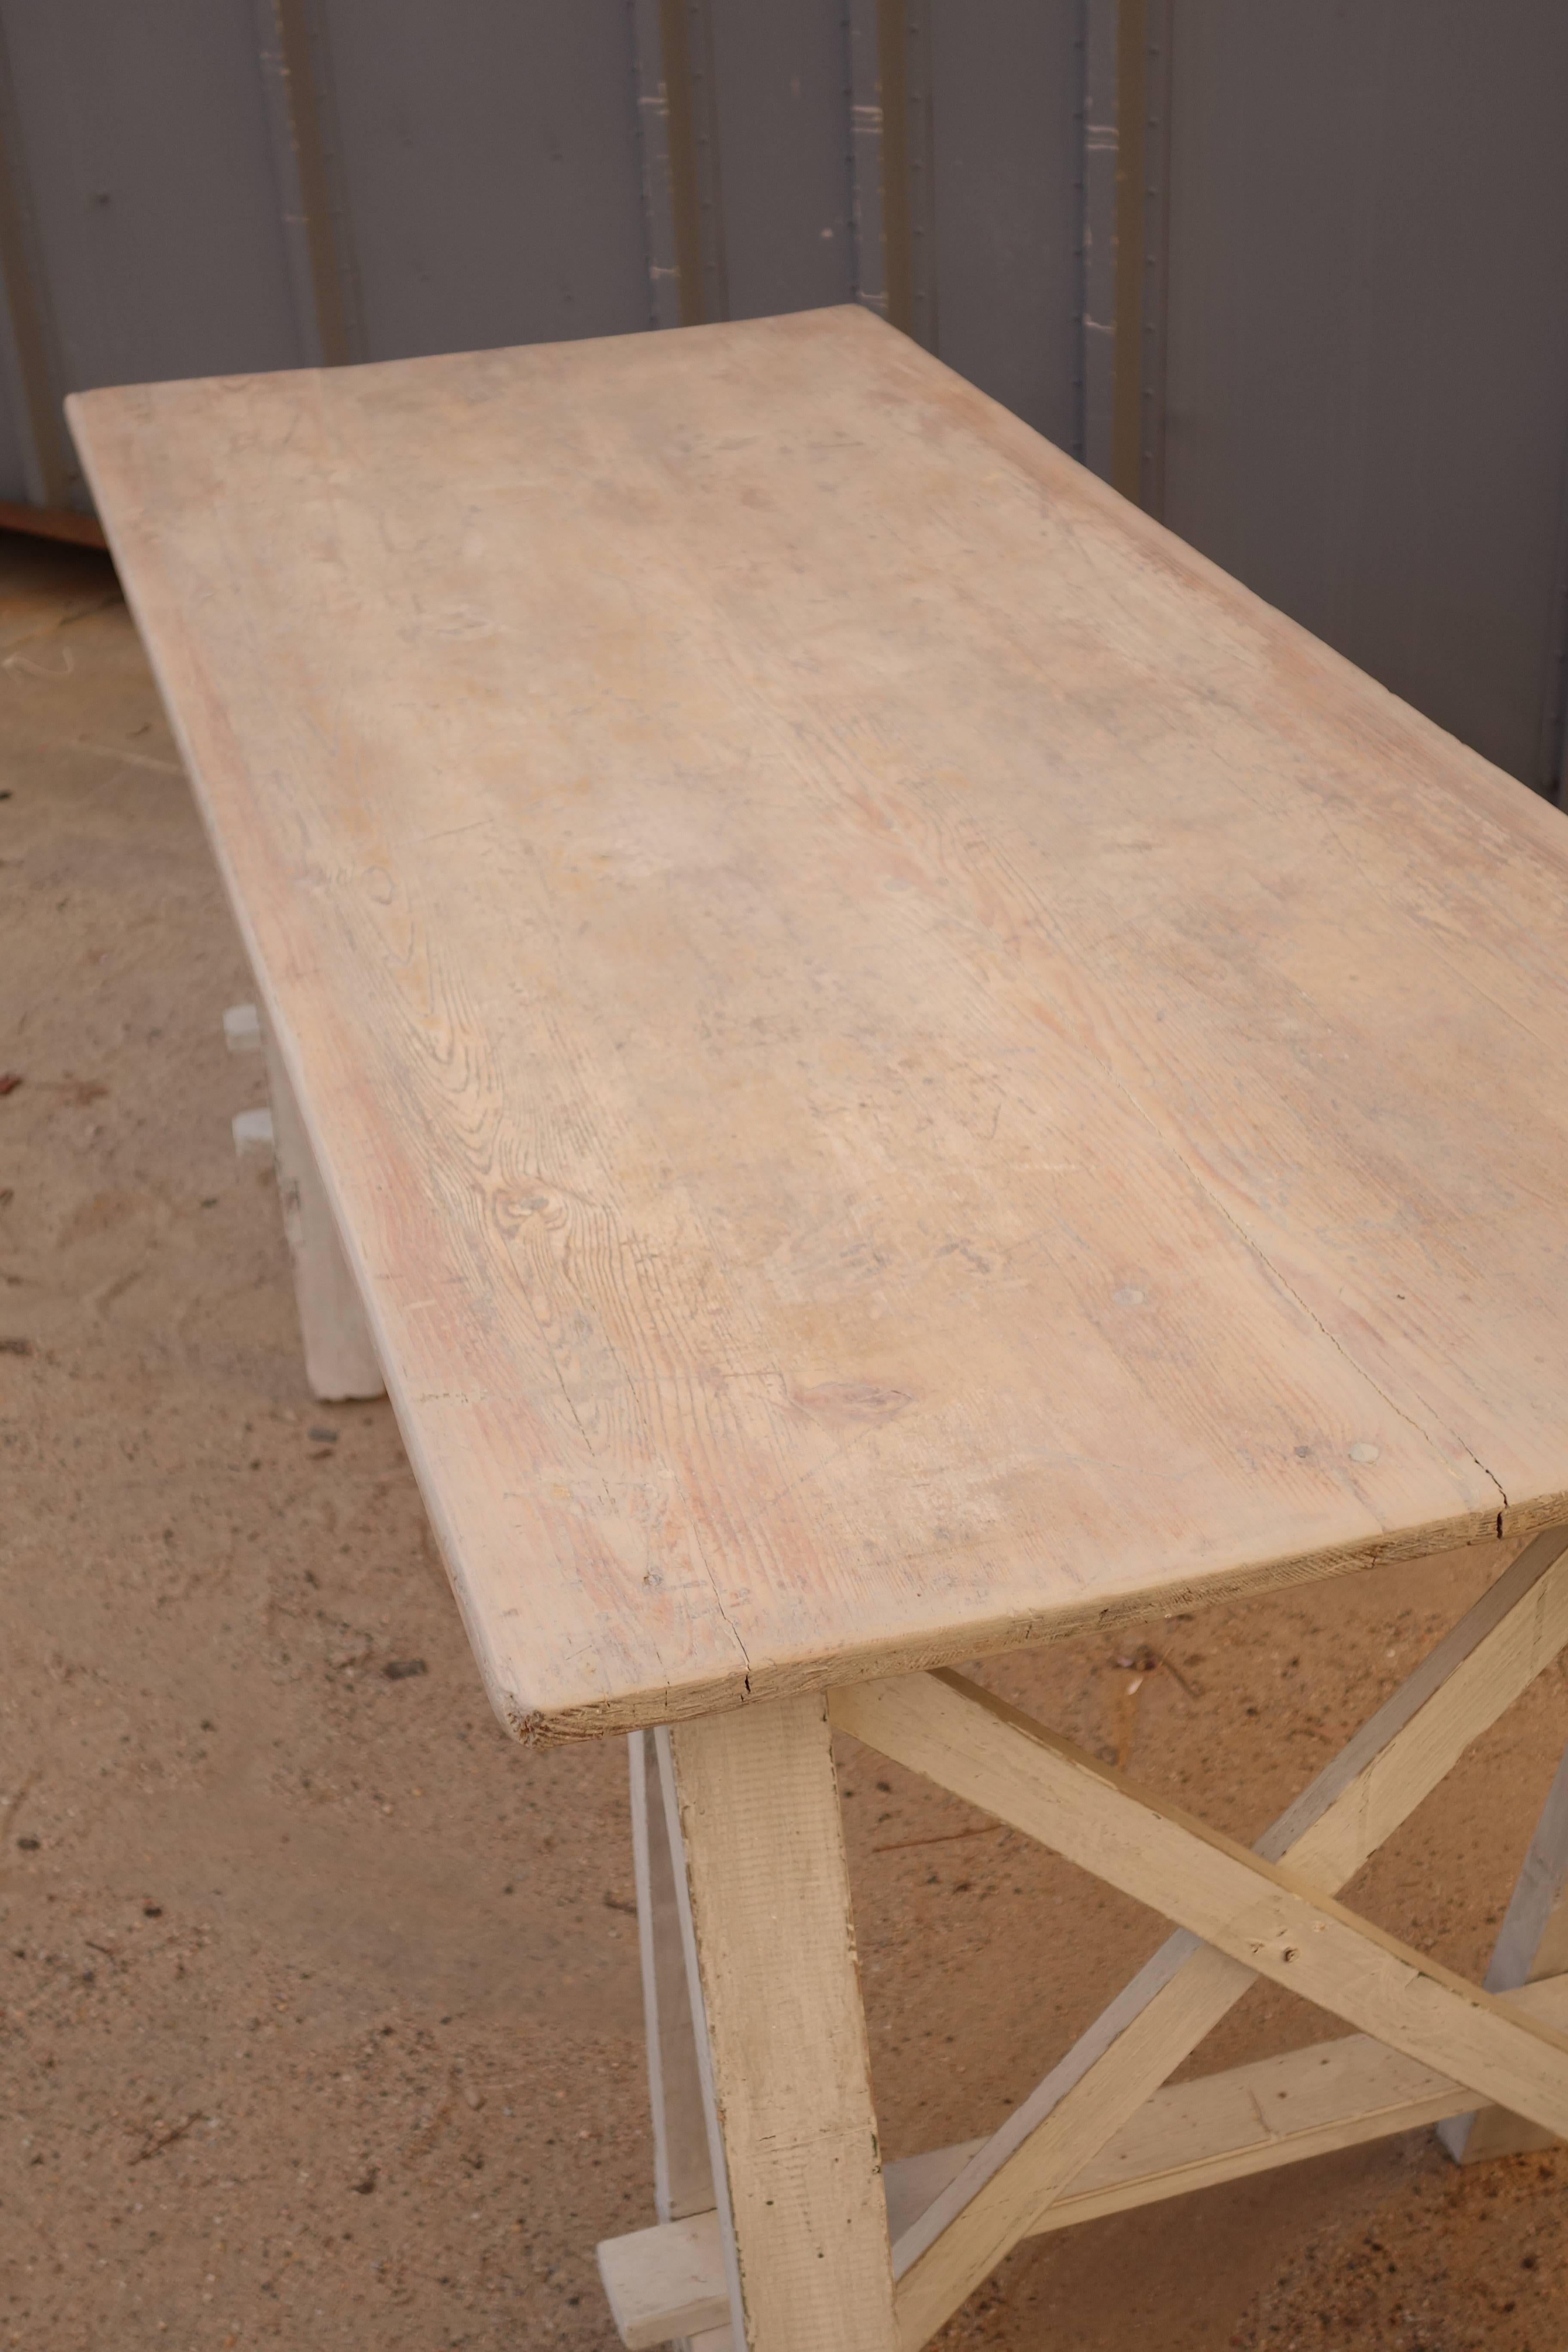 Simple work table with two white painted trestle bases, white washed top.
Measurement between legs 41